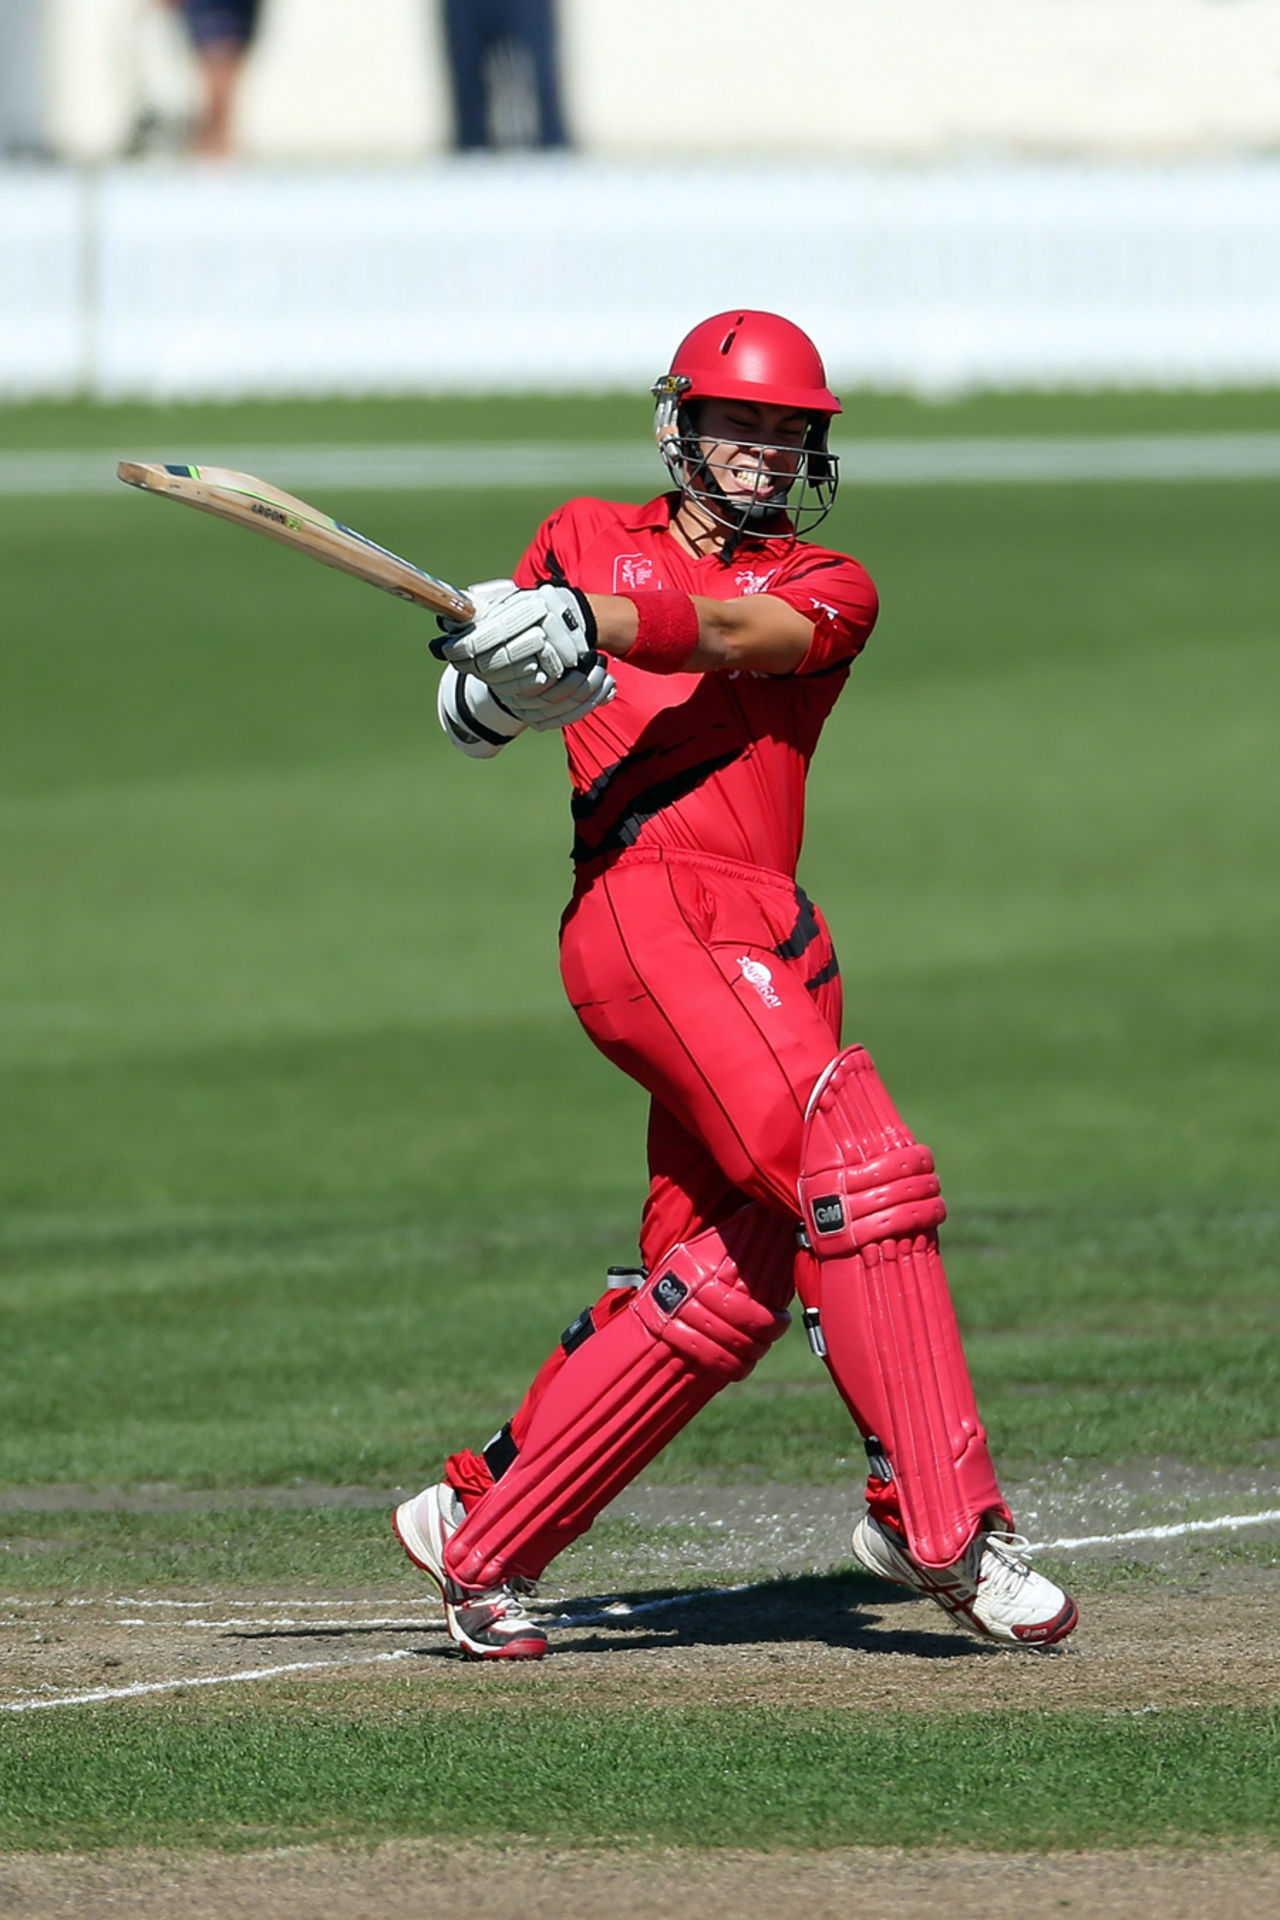 Mark Chapman of Hong Kong bats during the ICC Cricket World Cup Qualifier match between Namibia and Hong Kong at Mainpower Oval on January 28, 2014 in Rangiora, New Zealand. (Photo by Martin Hunter-IDI/IDI via Getty Images)